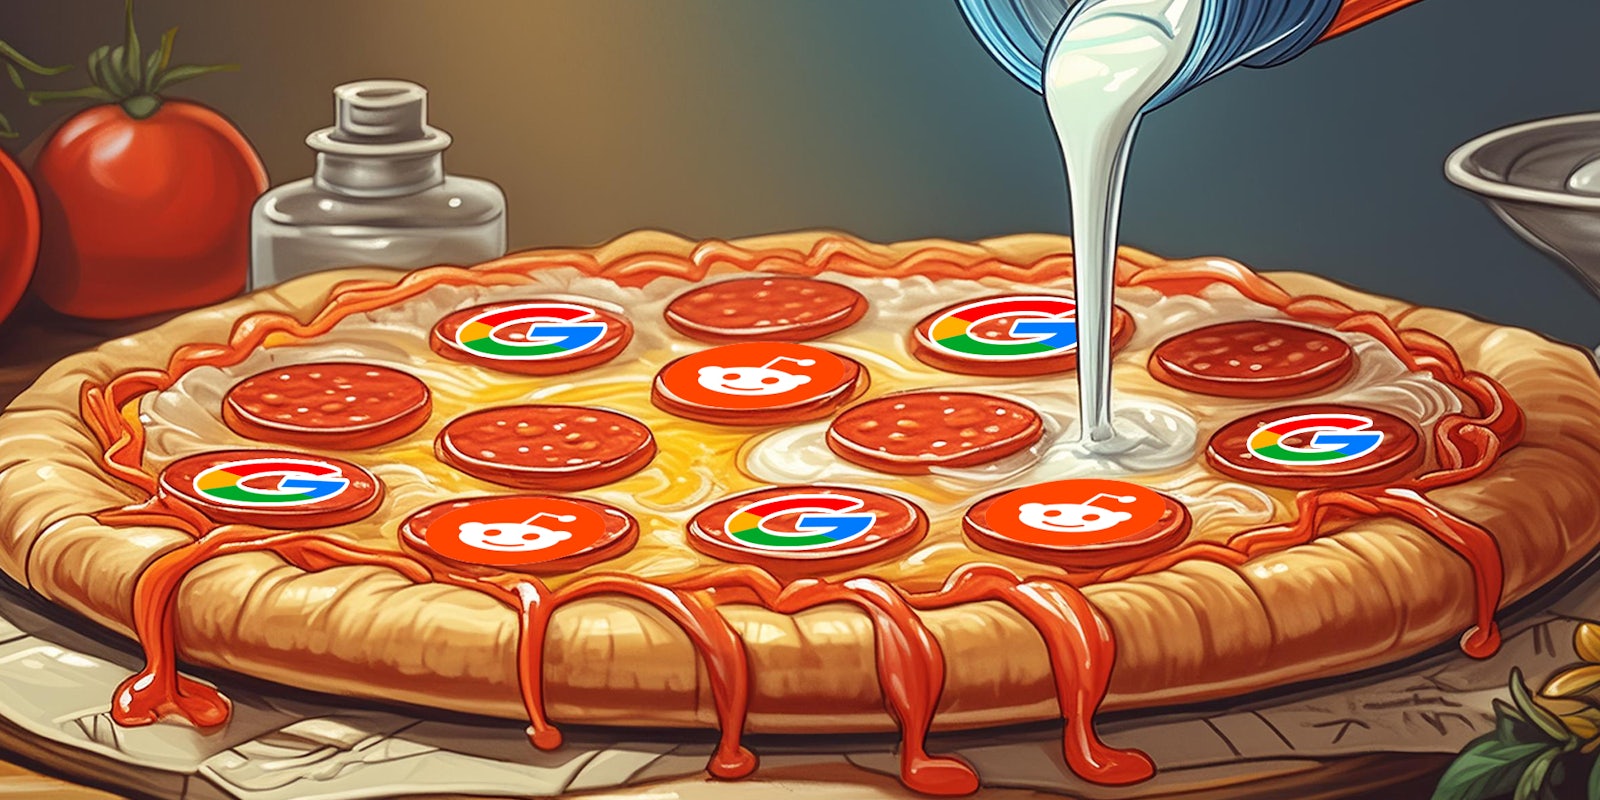 Google's AI Overview tool suggests adding glue to pizza sauce to stop the cheese from sliding off